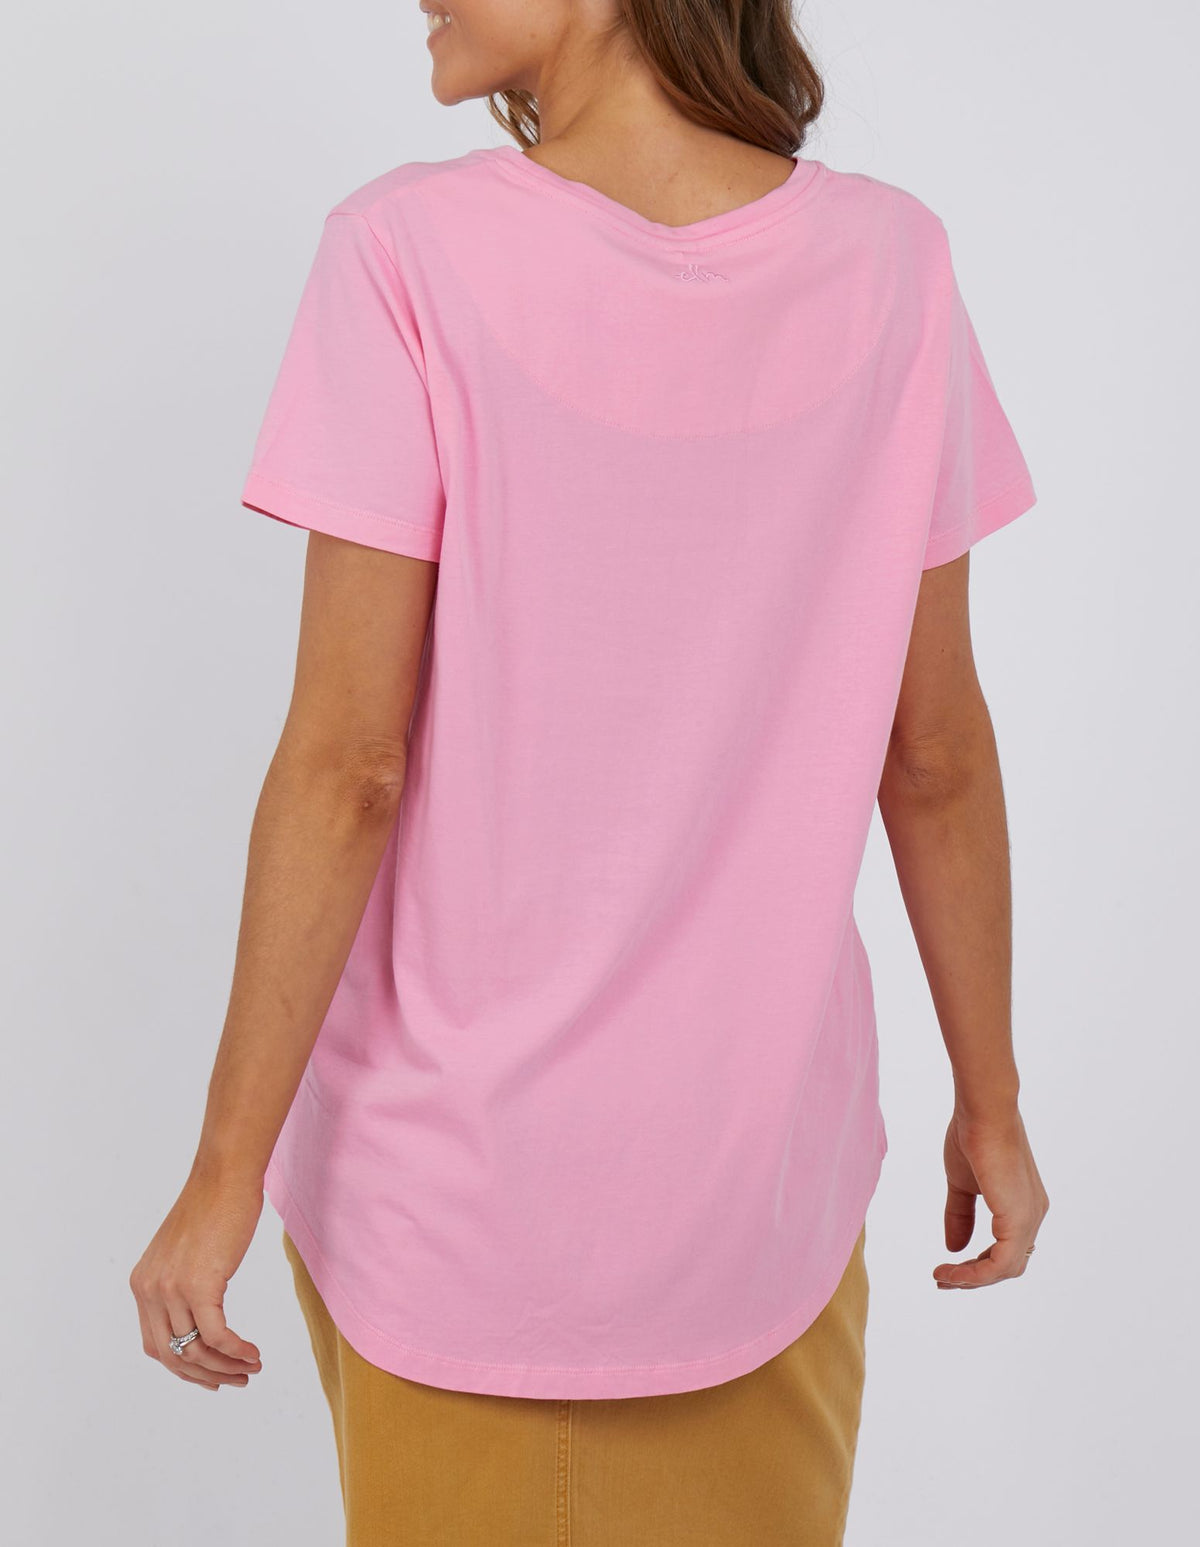 Fall In Love Tee - Sherbet Pink - Elm Lifestyle